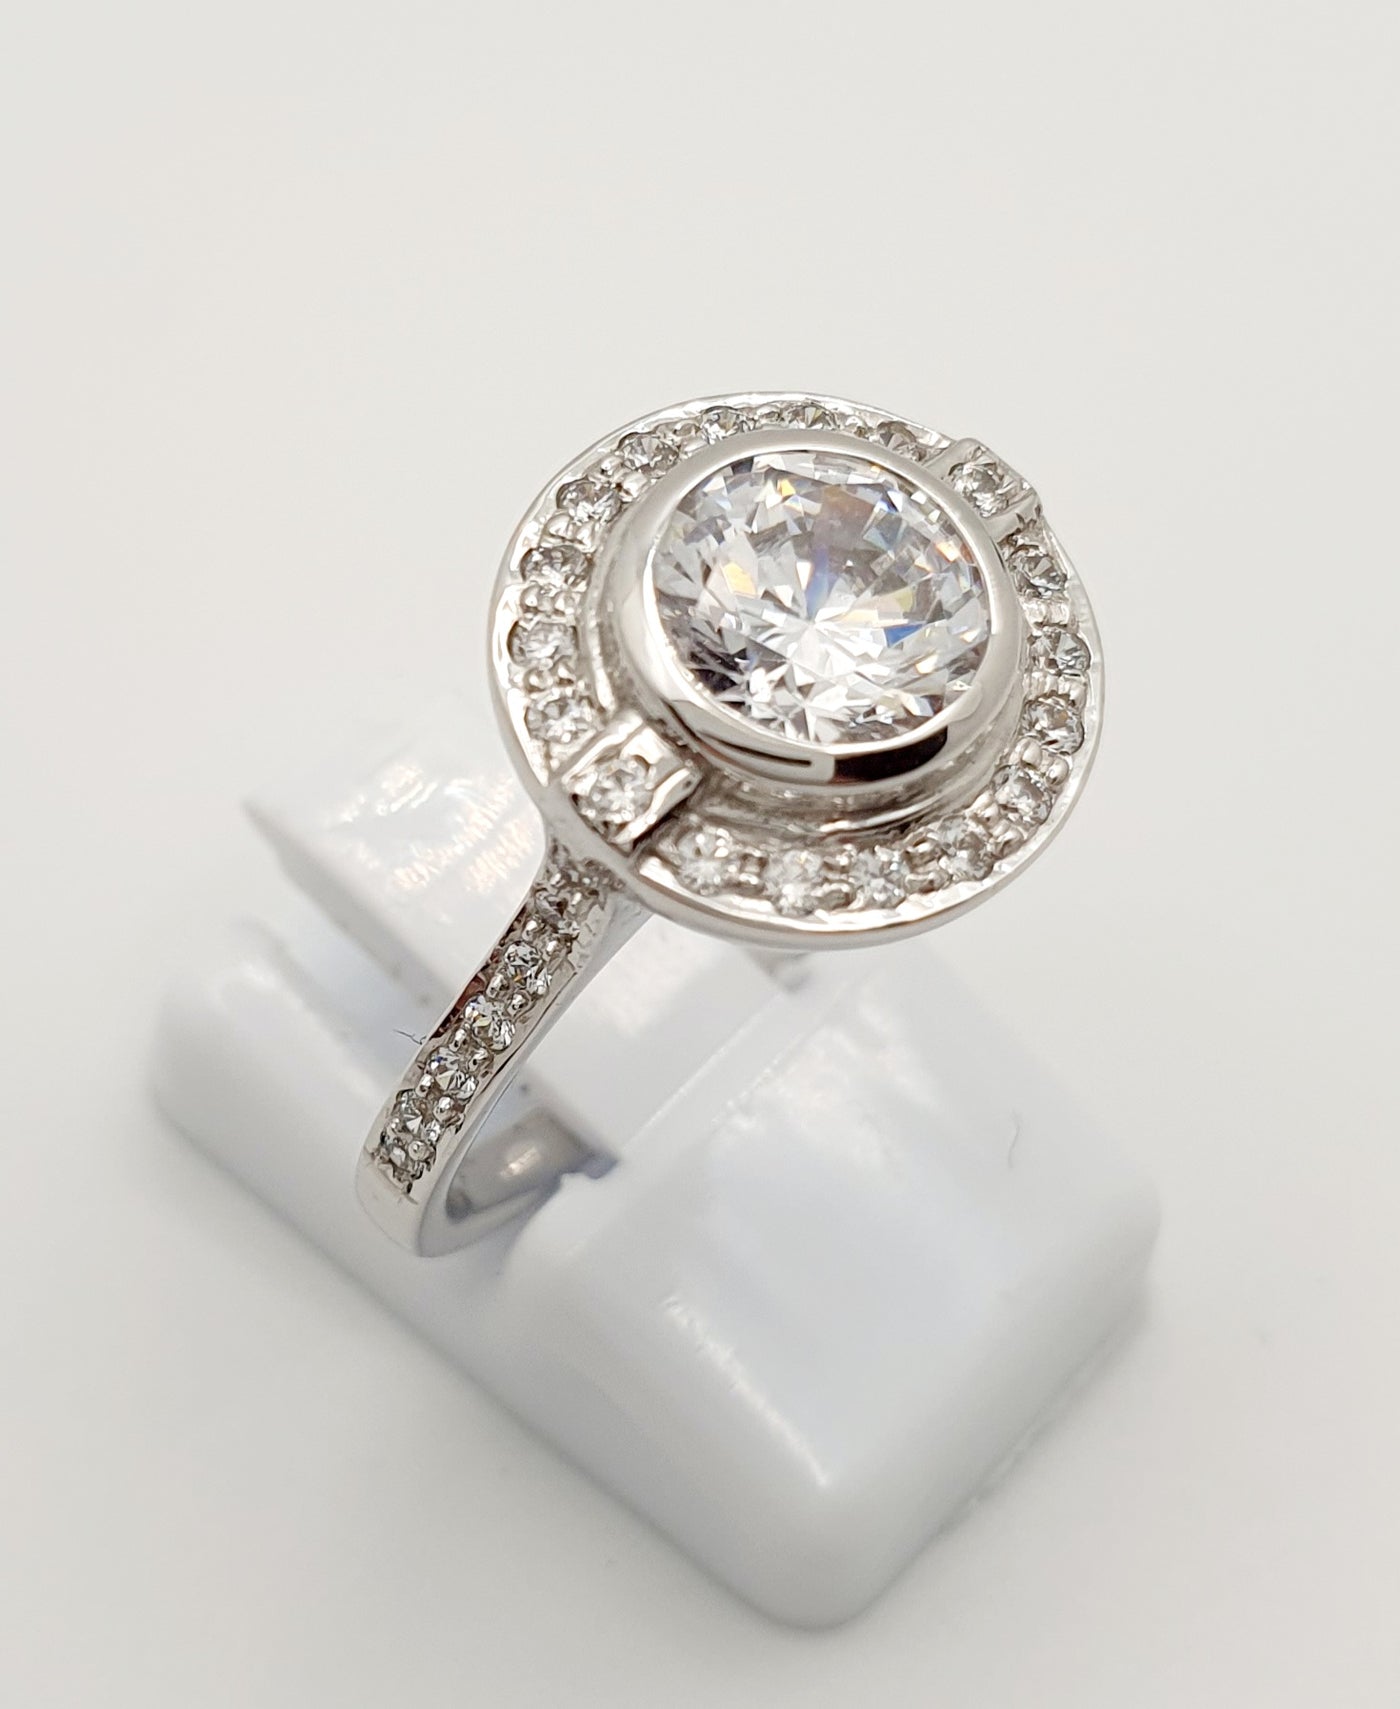 9ct White Gold Cubic Zirconia Ring